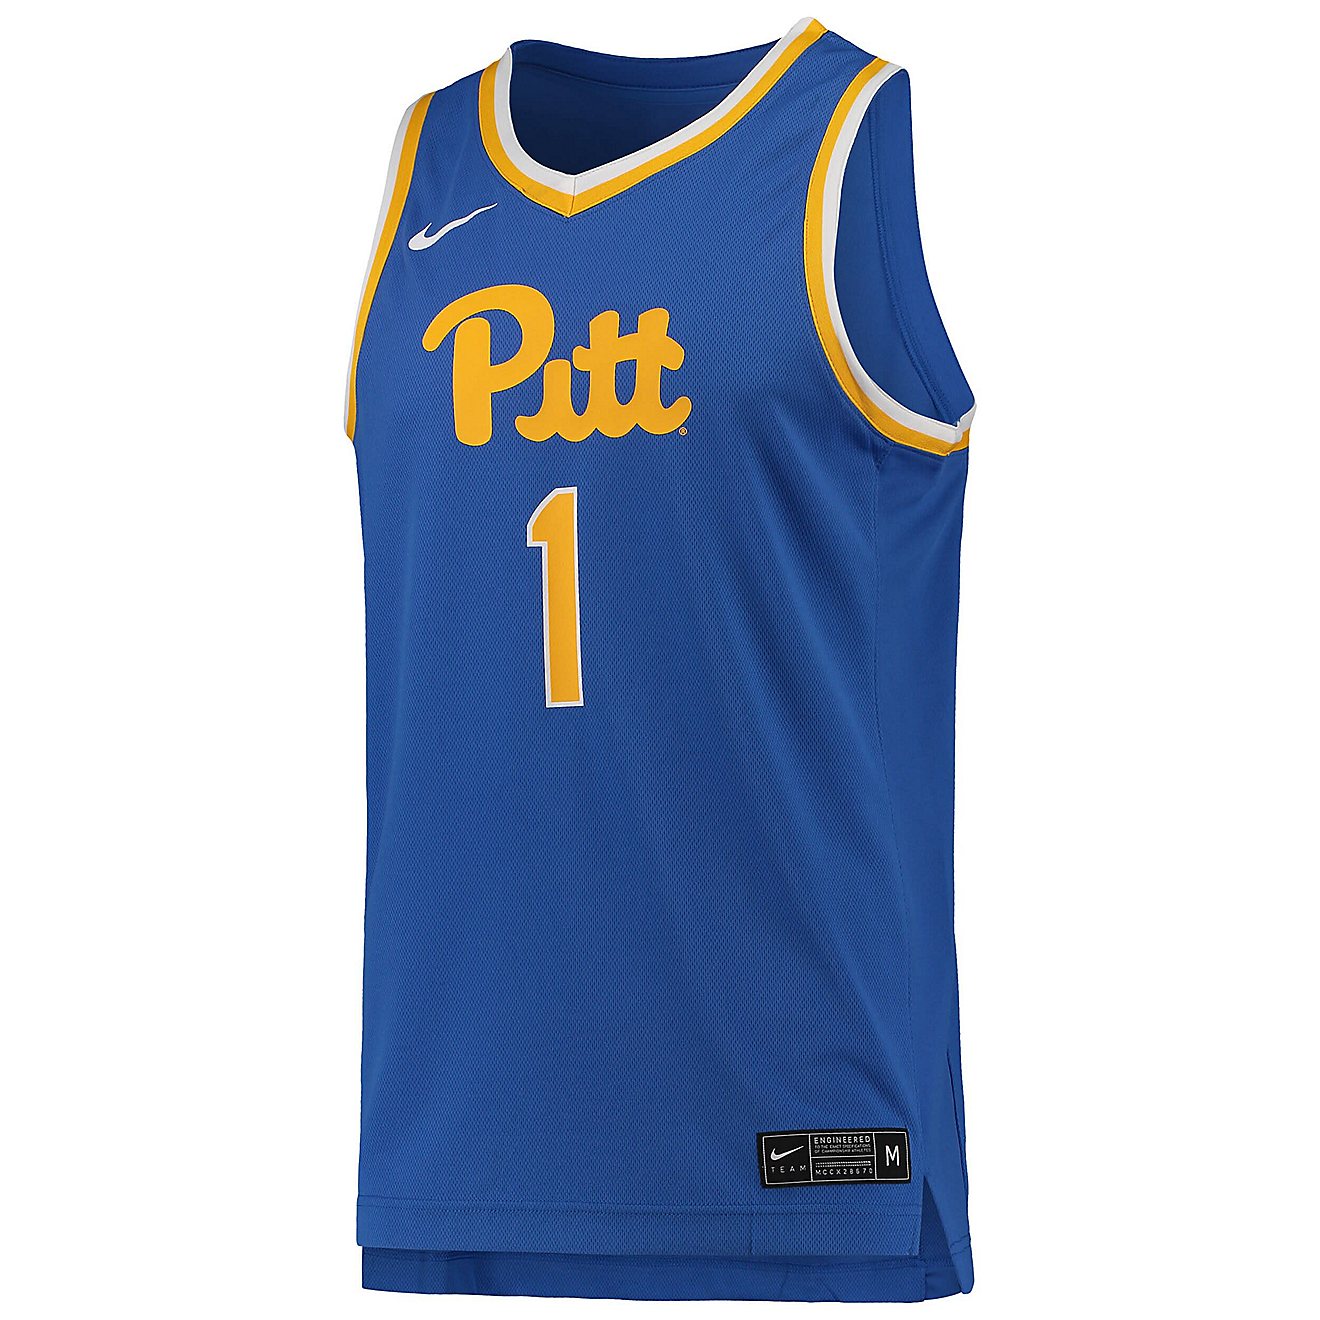 Nike 1 Pitt Panthers Team Replica Basketball Jersey                                                                              - view number 2